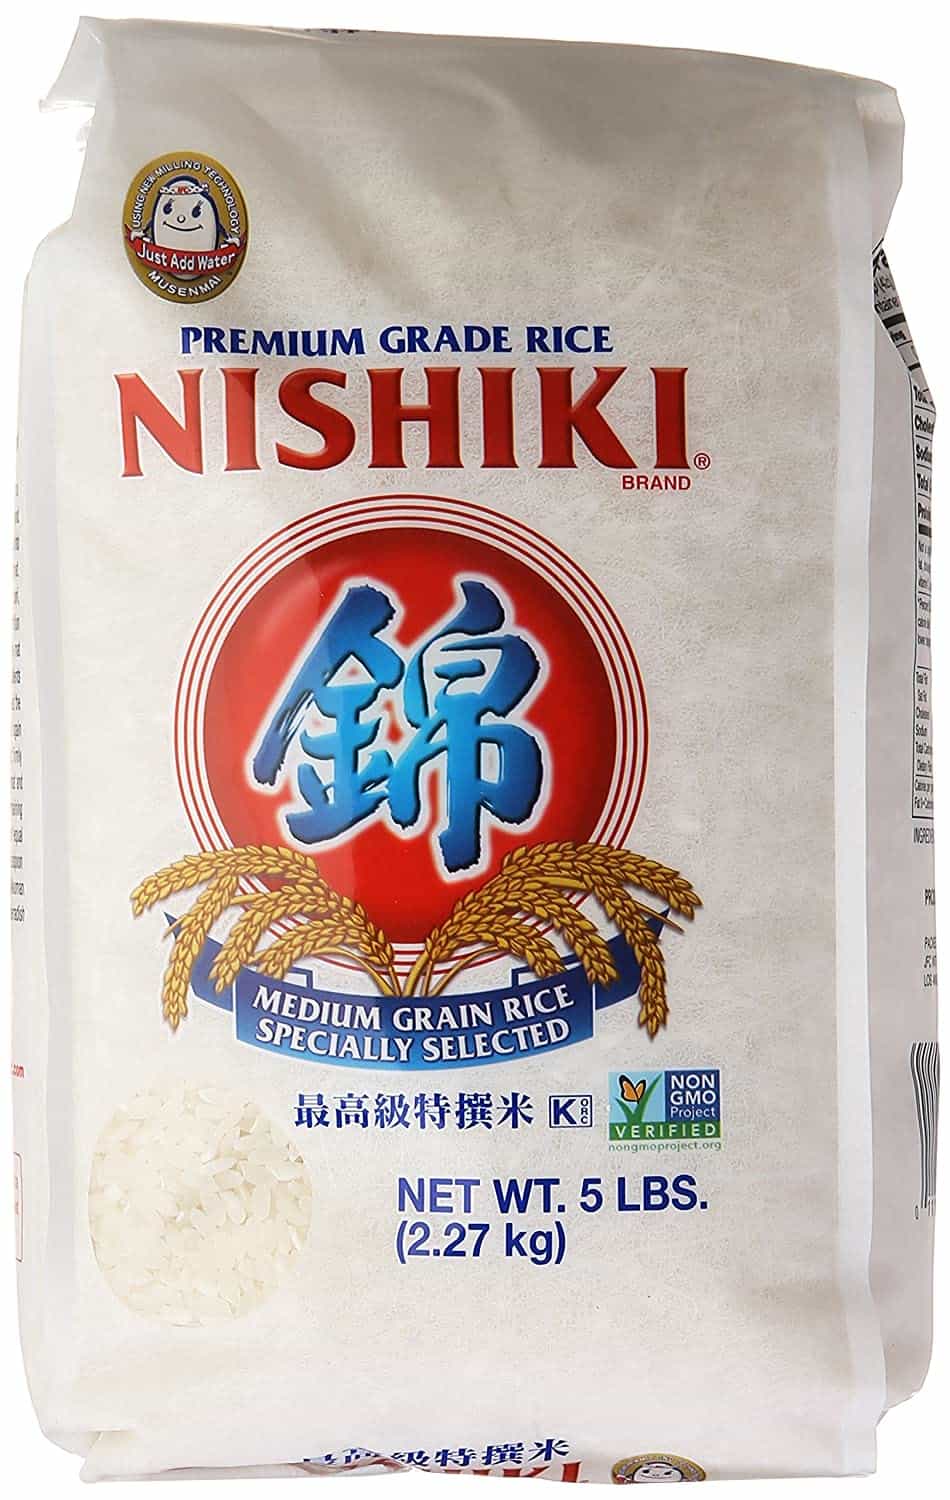 Nishiki sushi rice as a substitute for glutionous rice